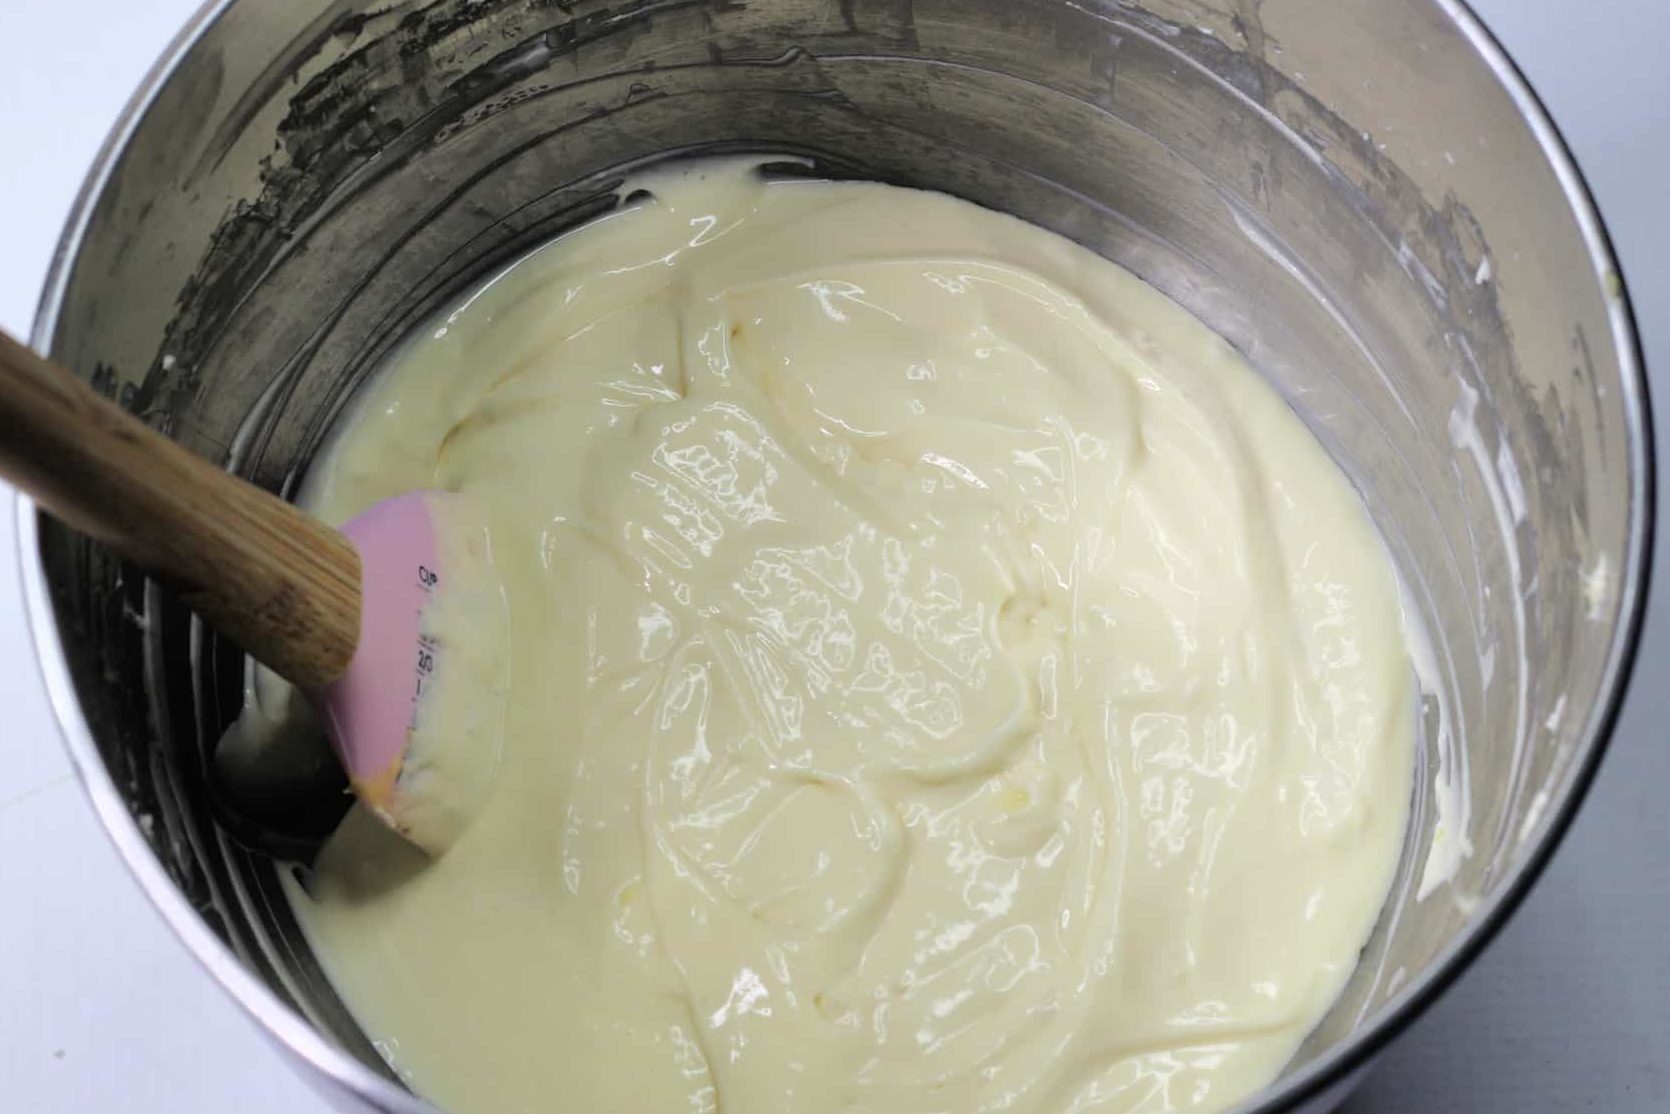 Using a medium bowl, whisk together the evaporated milk and pudding mix until combined and thick for about 2 minutes